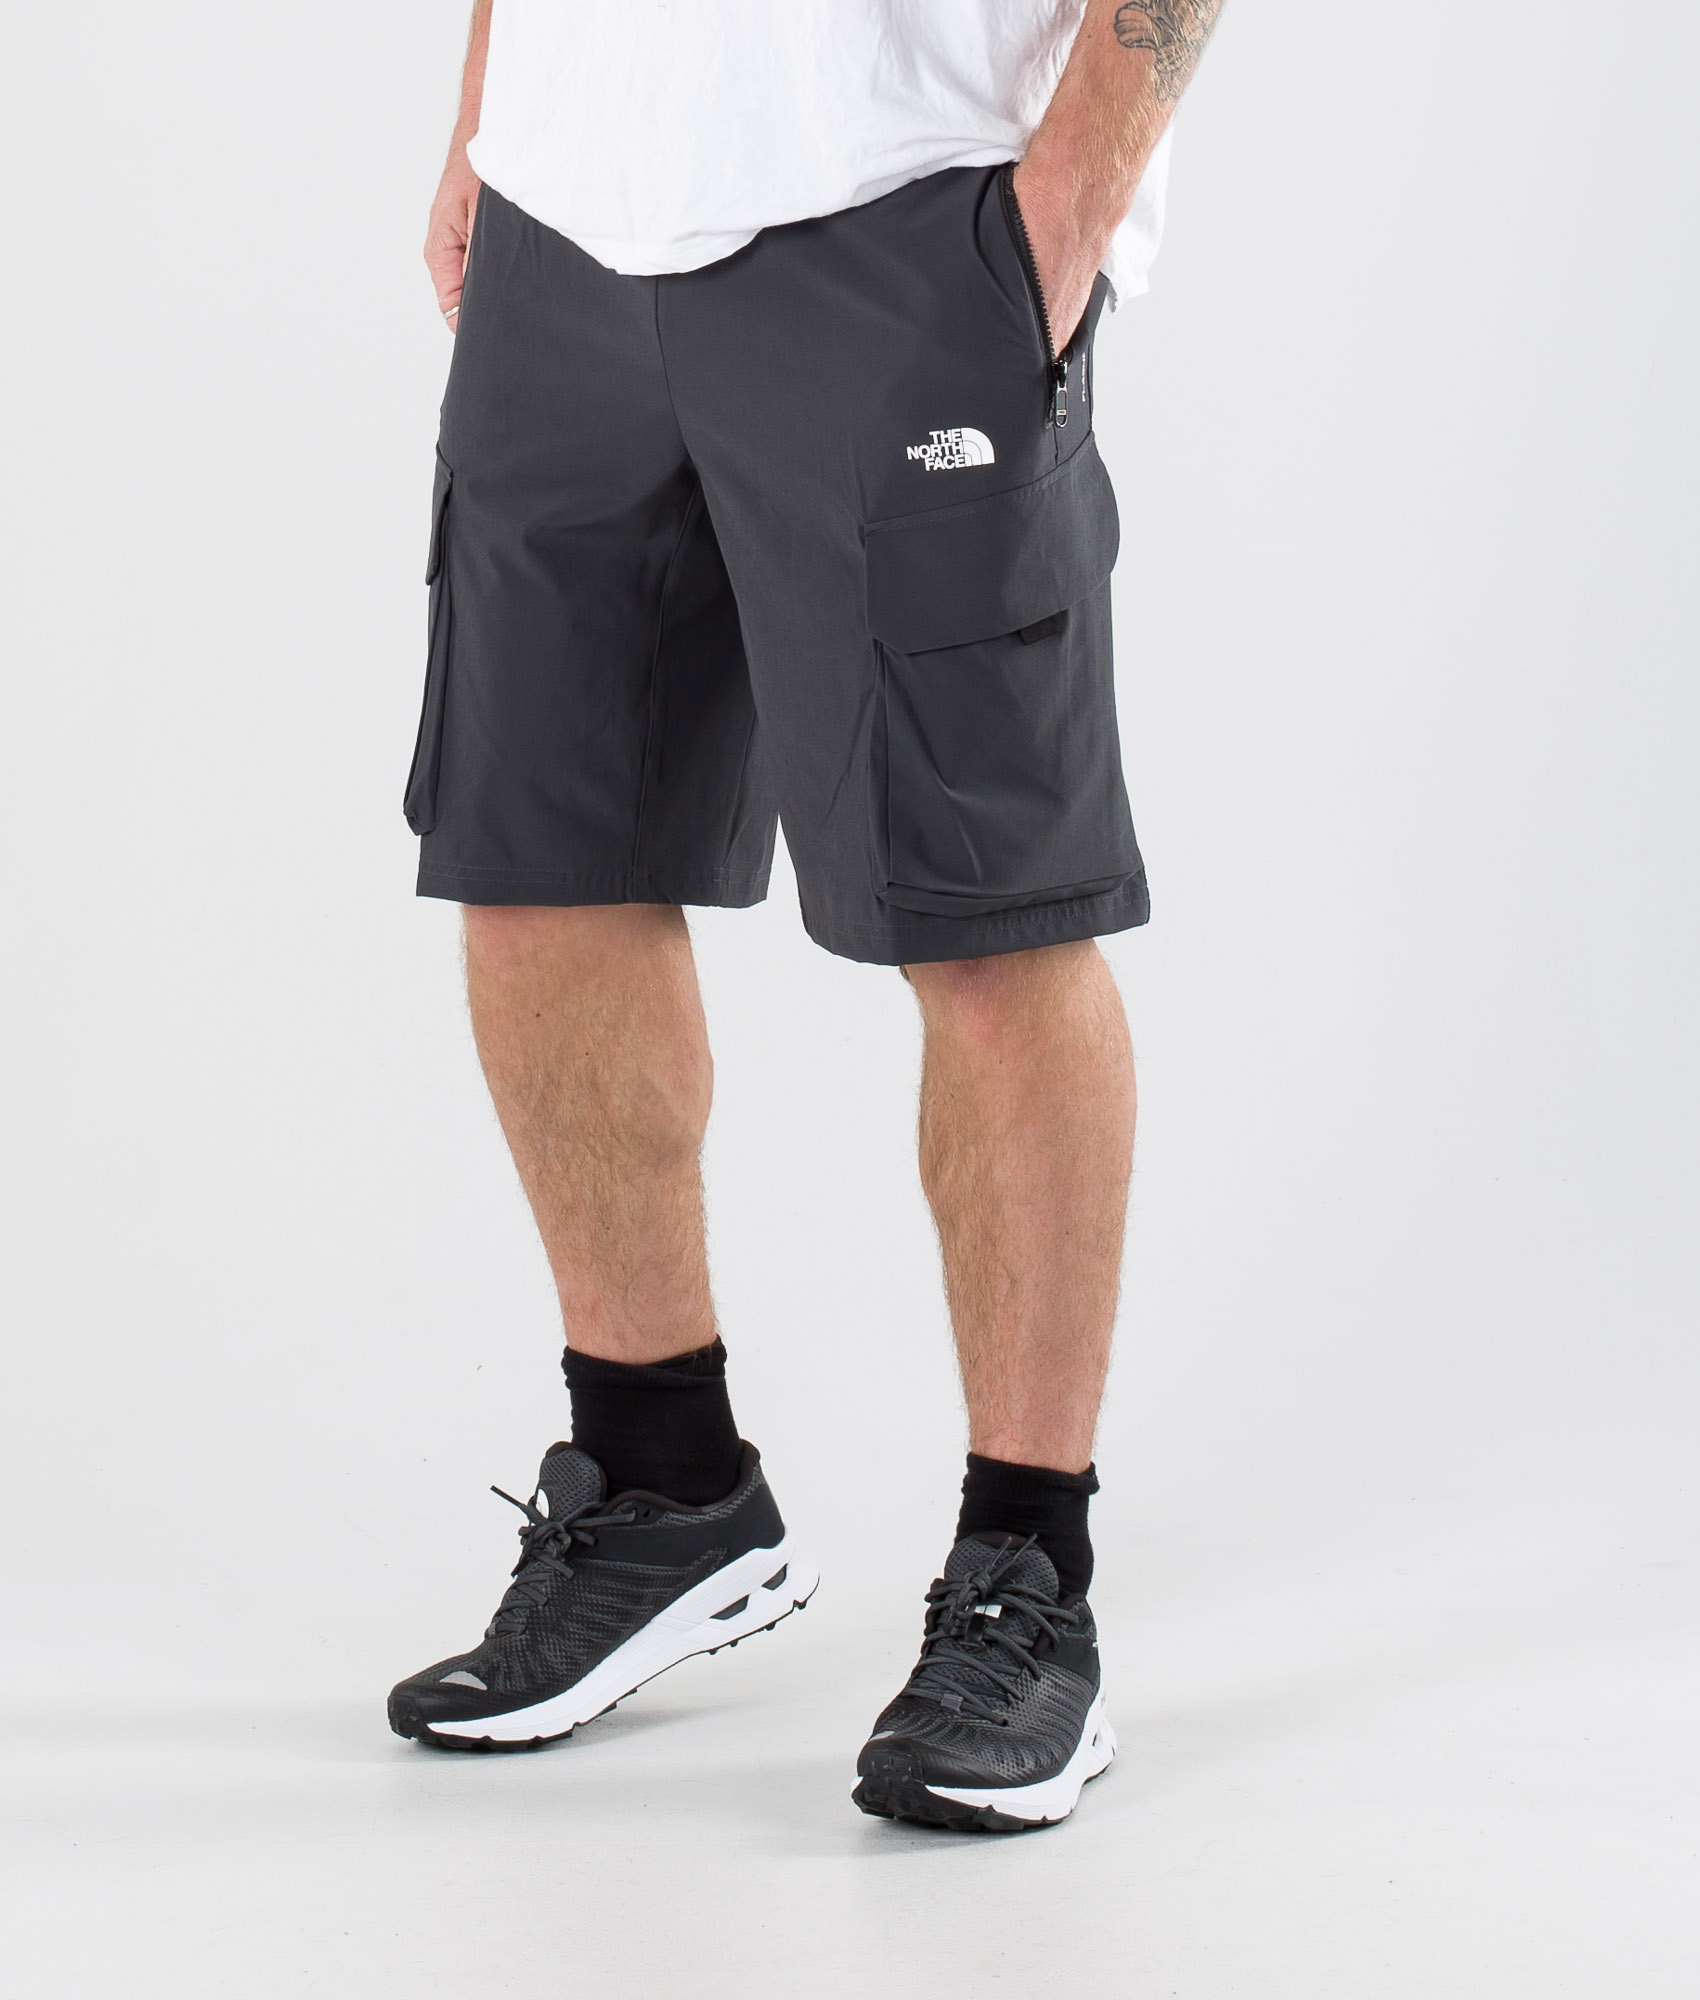 face on shorts